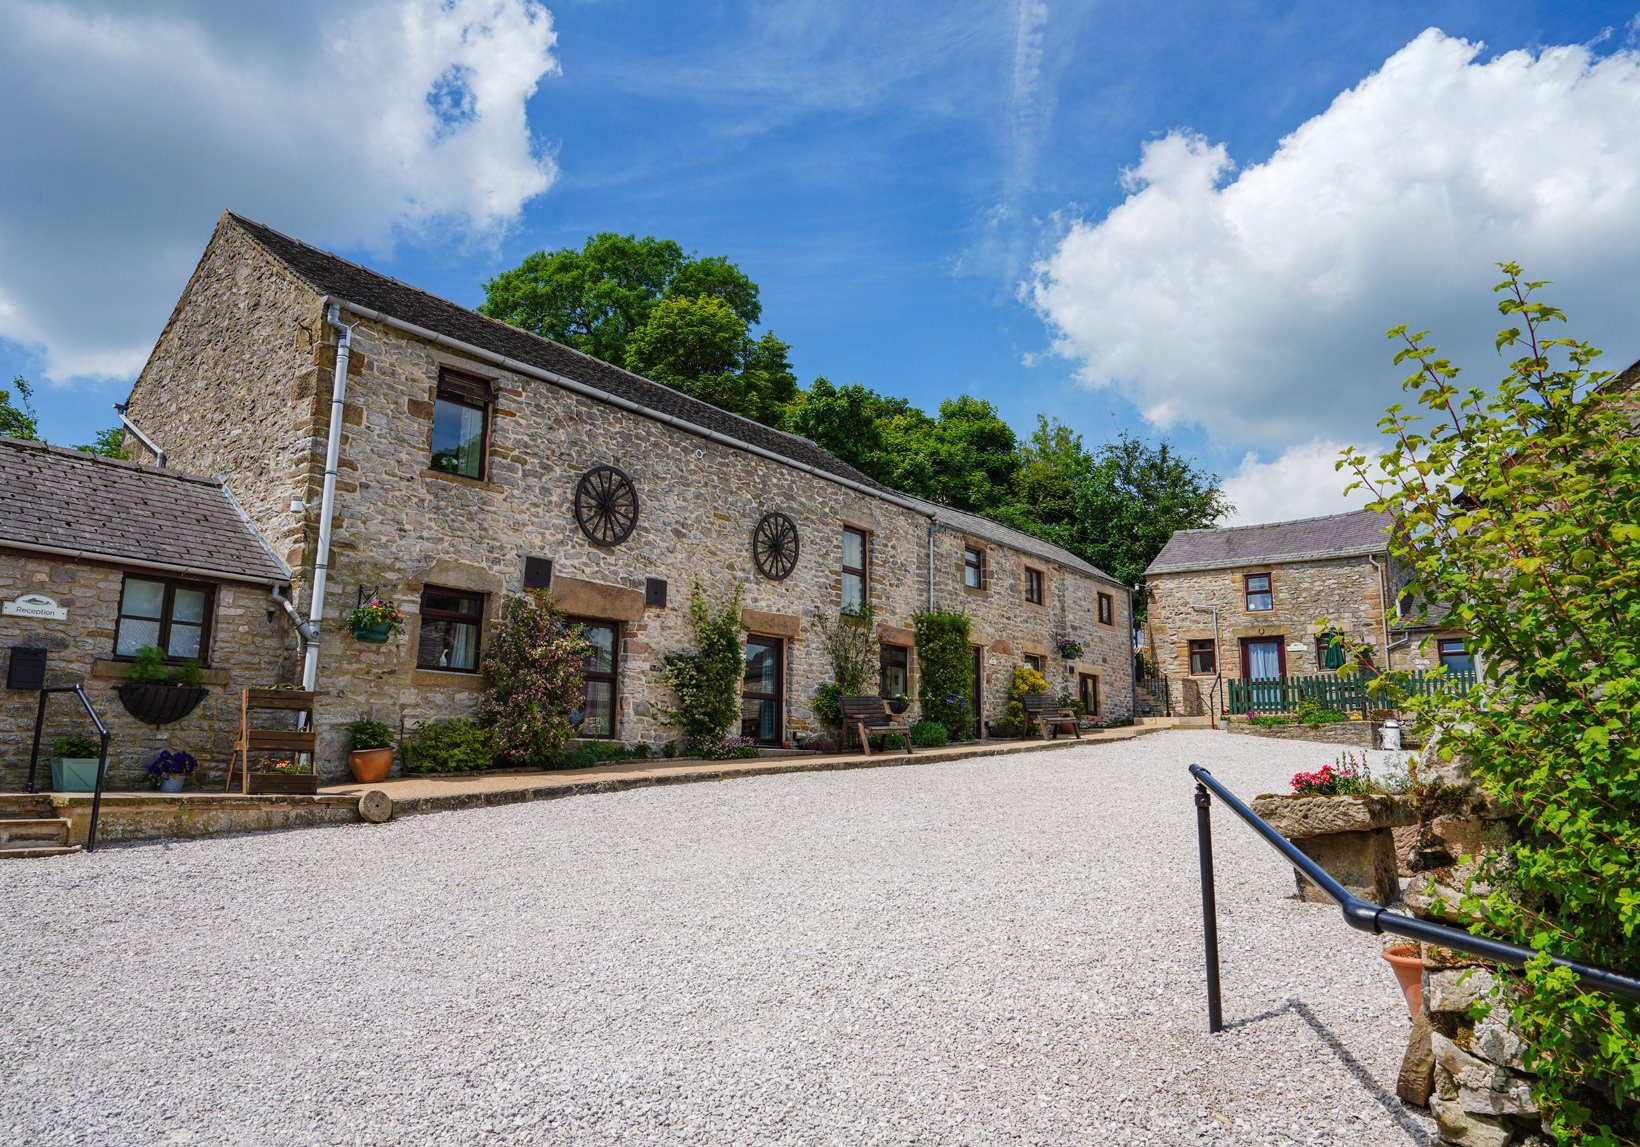 Bakewell Cottages at Bolehill Farm - dogs welcome, ideal for Peak District dog friendly holidays